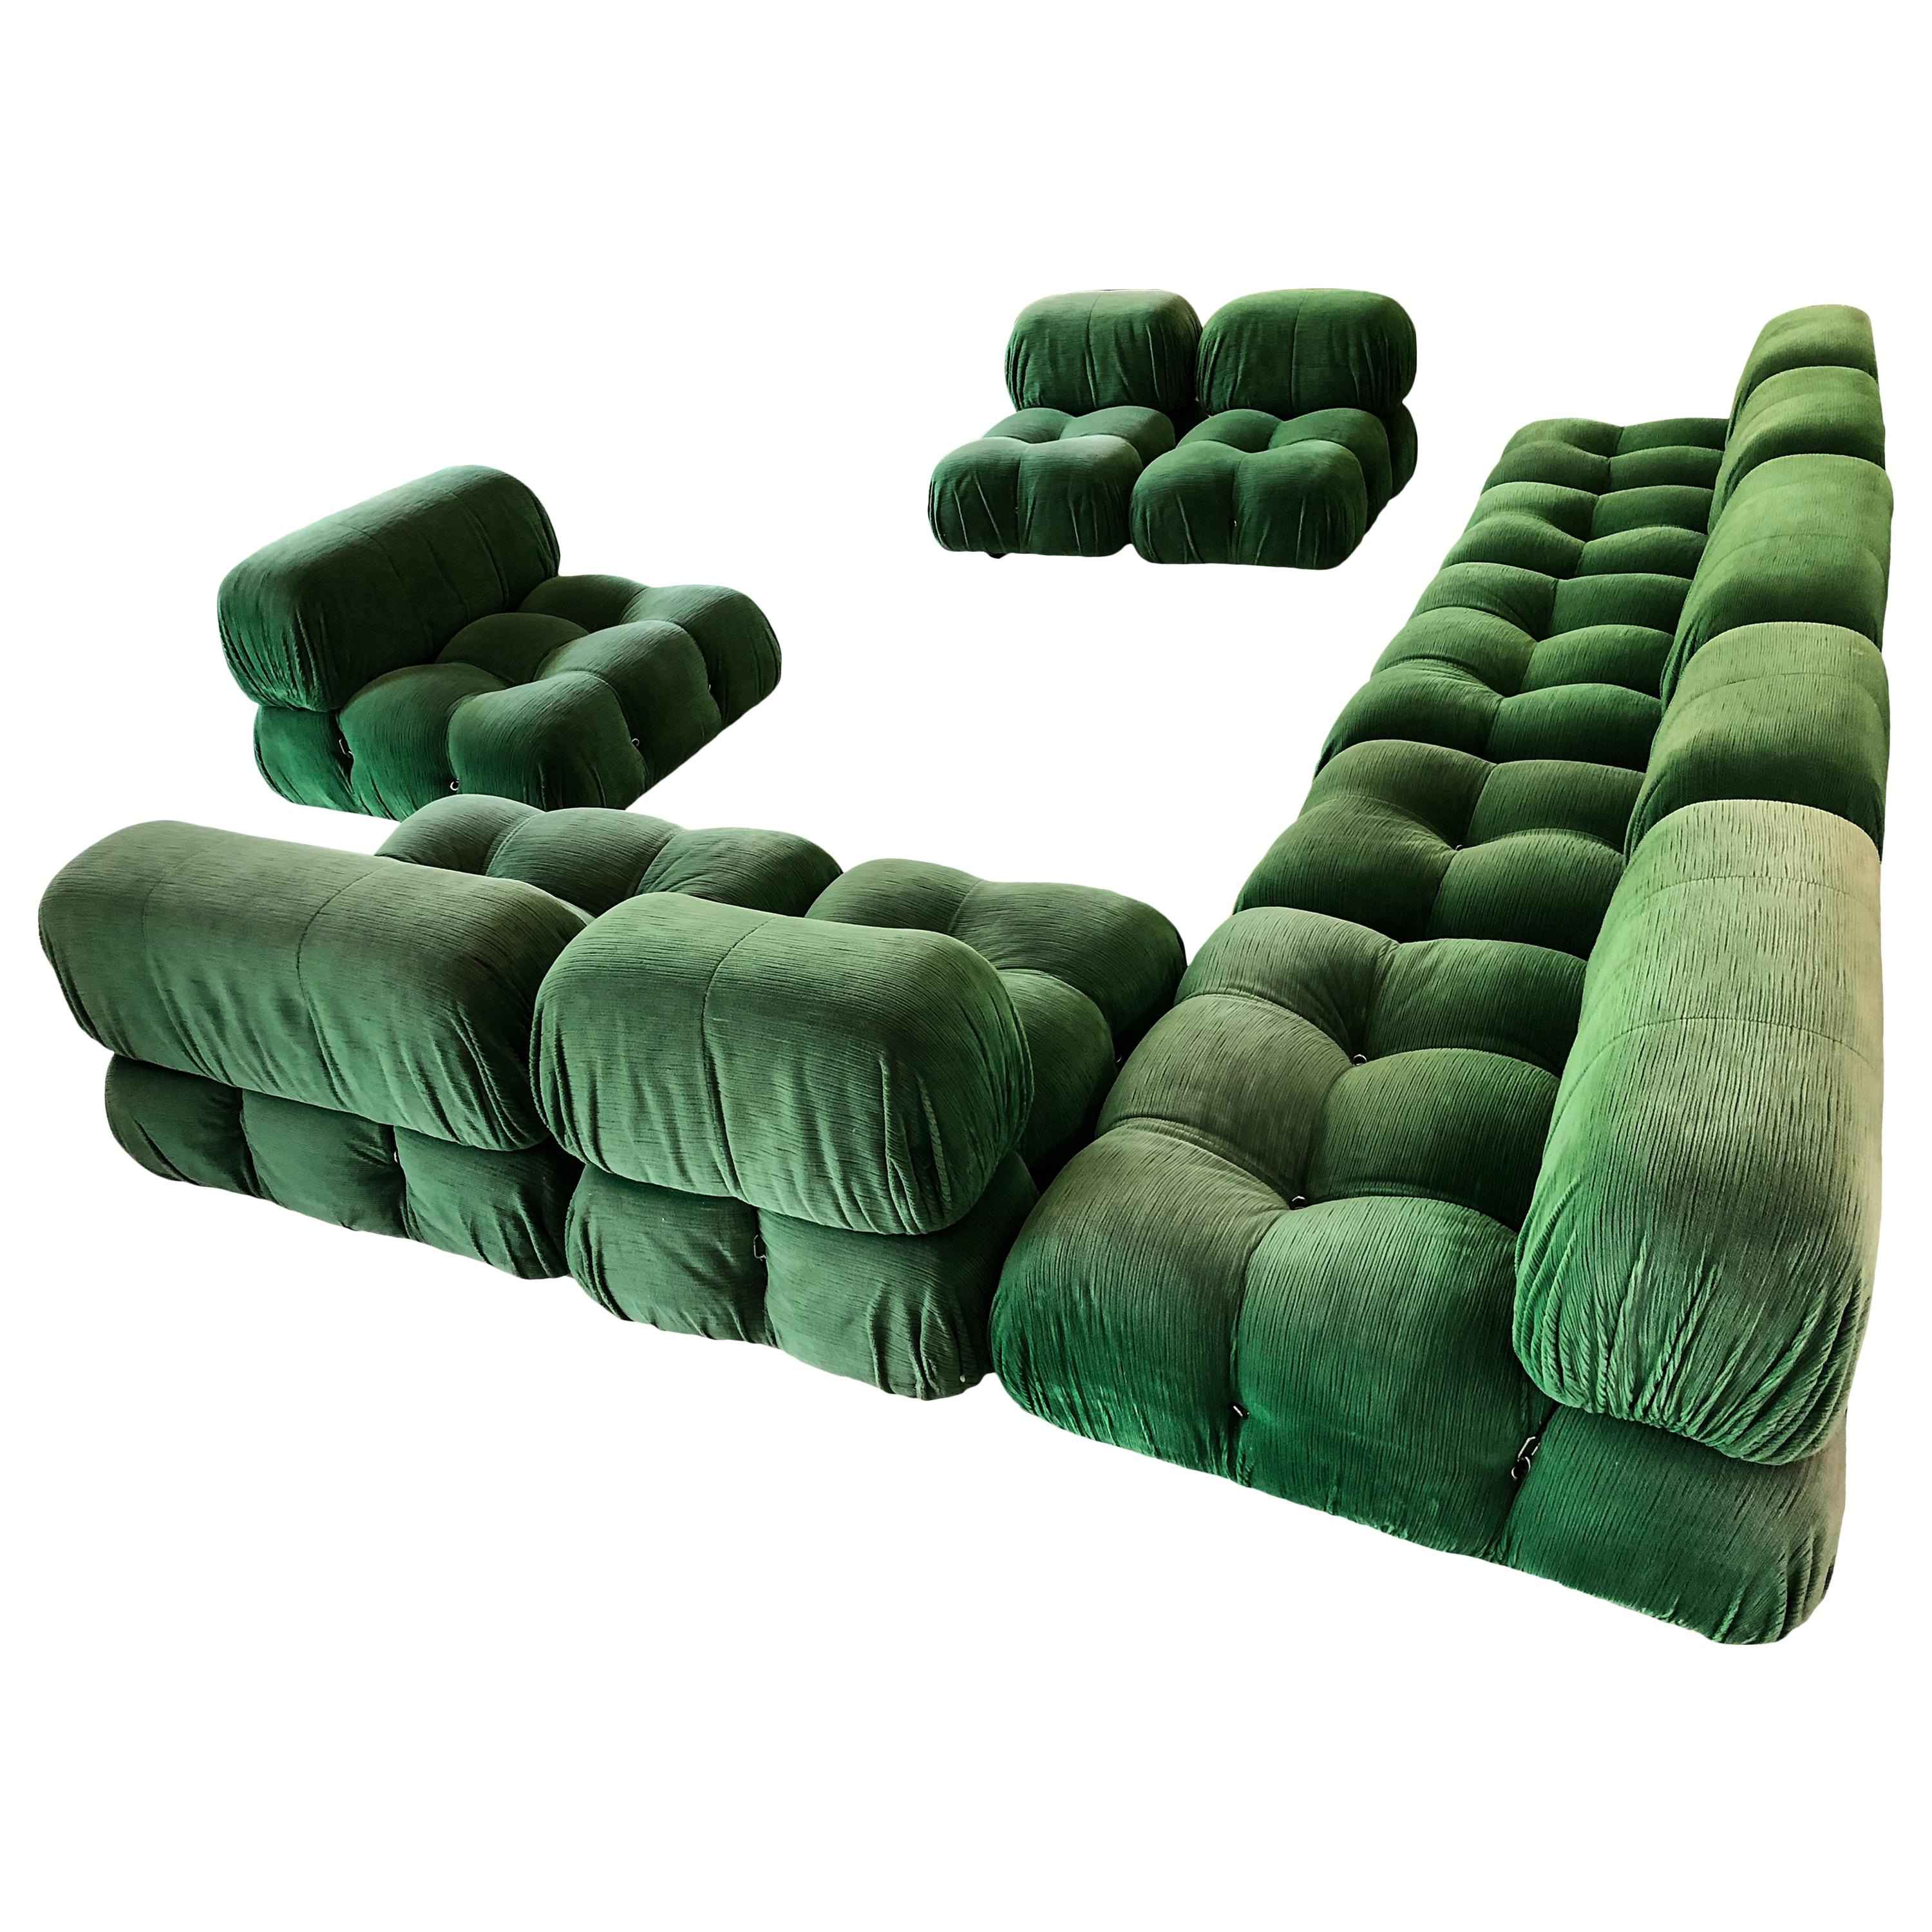 Mario Bellini, 'Camaleonda' sofa, in green velvet upholstery by Italy, 1972.
Composed of 4 big and 6 medium sized elements.
It is upholstered with its original green velvet.

Excellent condition.

The sofa is very comfortable and the fact this